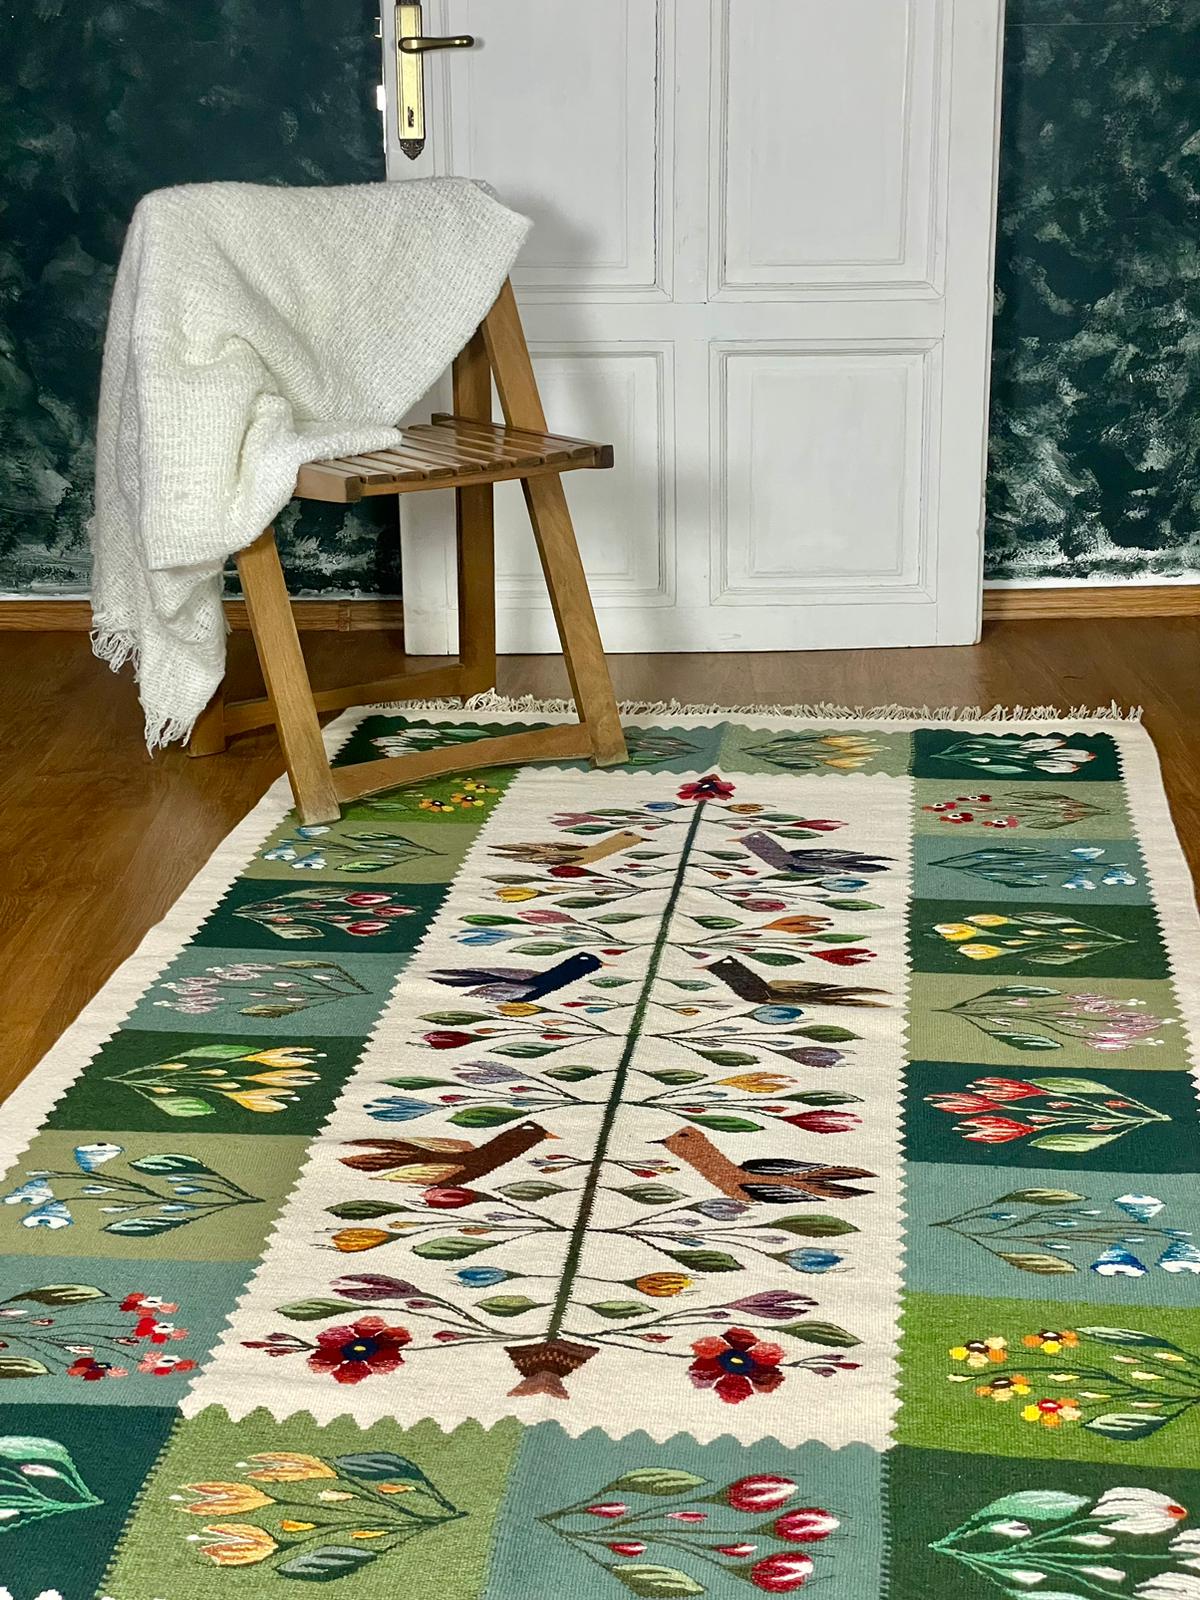 Rug from Oltenia - The Tree of Life, Three Generations